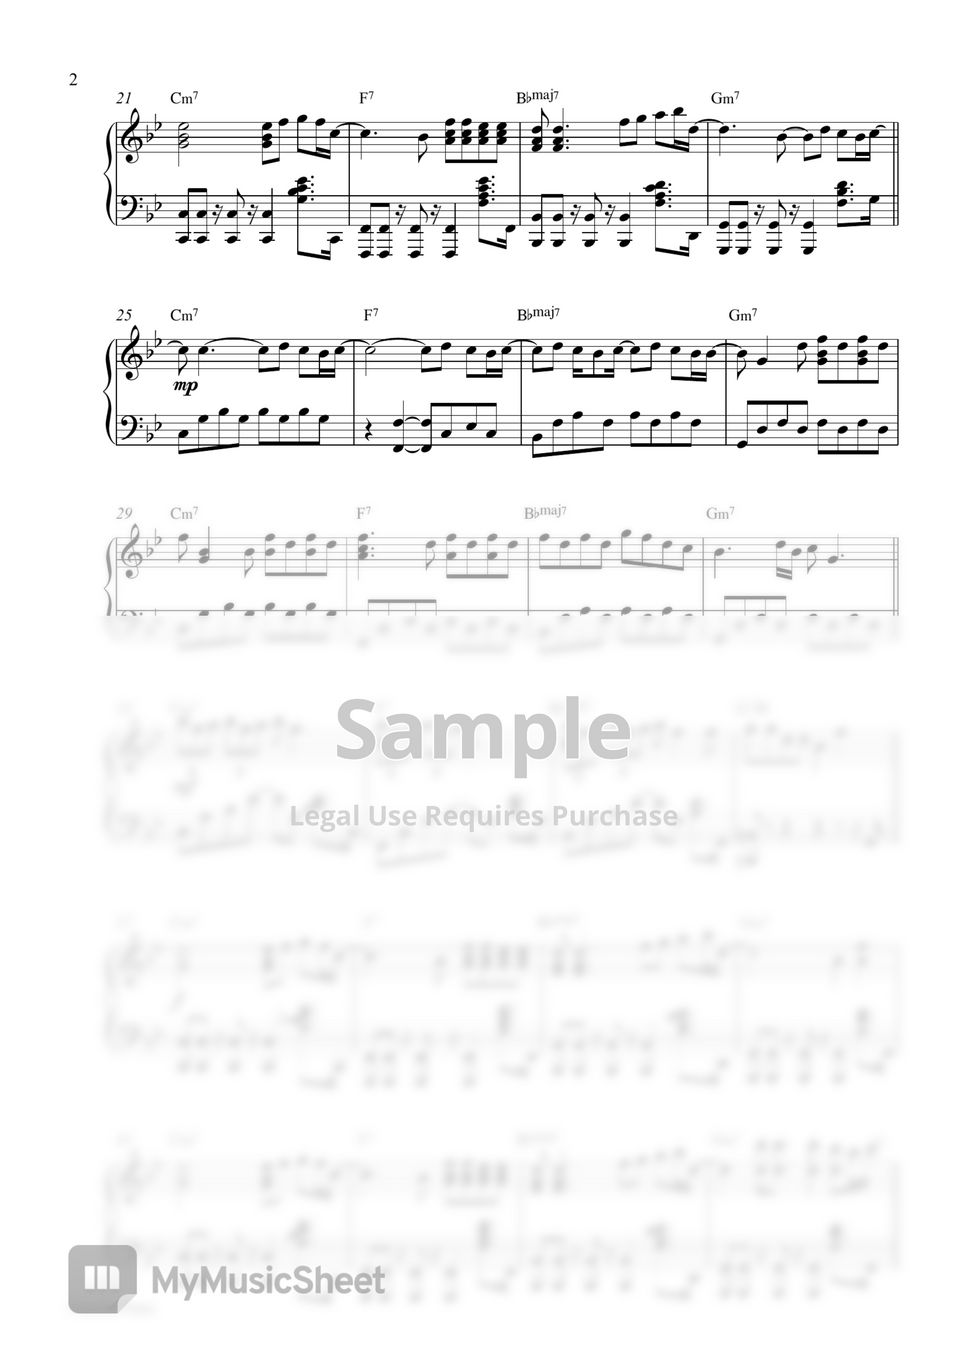 IVE - Off The Record (Piano Sheet) by Pianella Piano